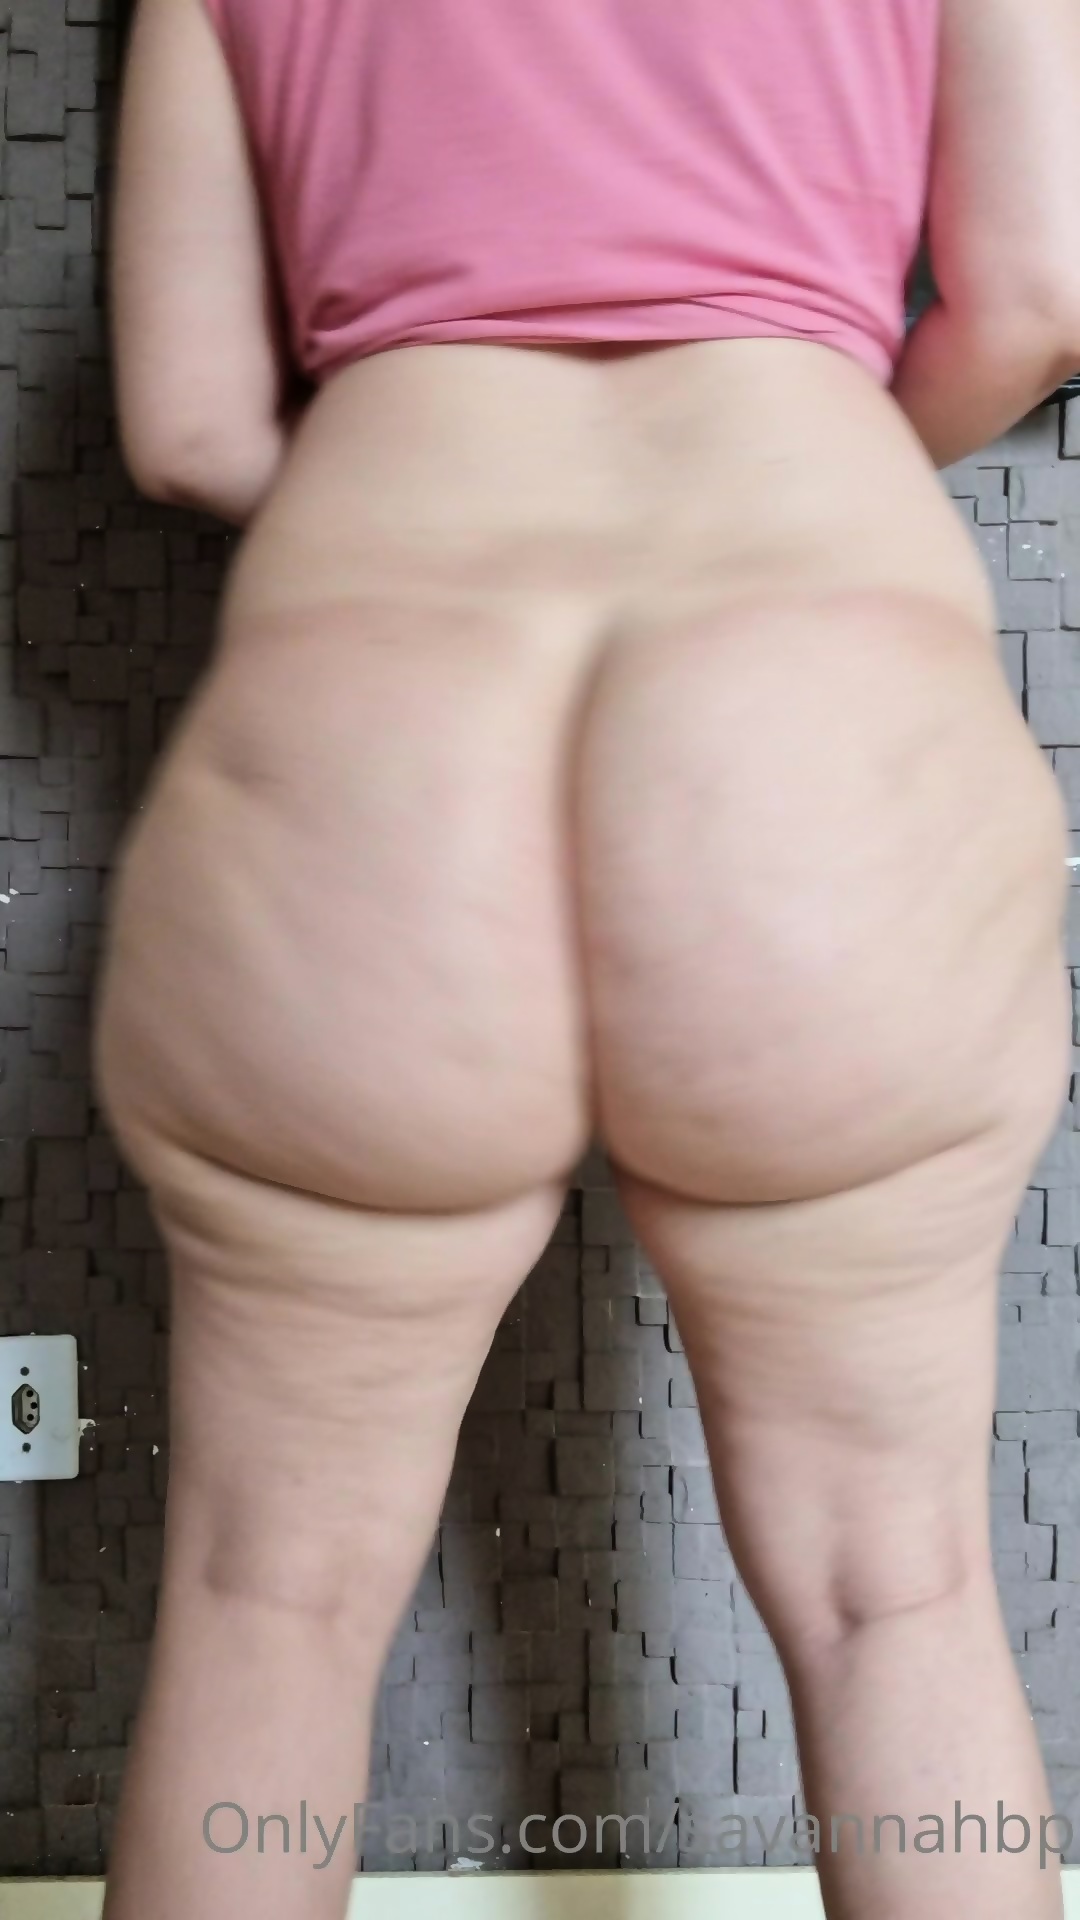 PAWG Jiggly Cellulite Saggy Tits photo